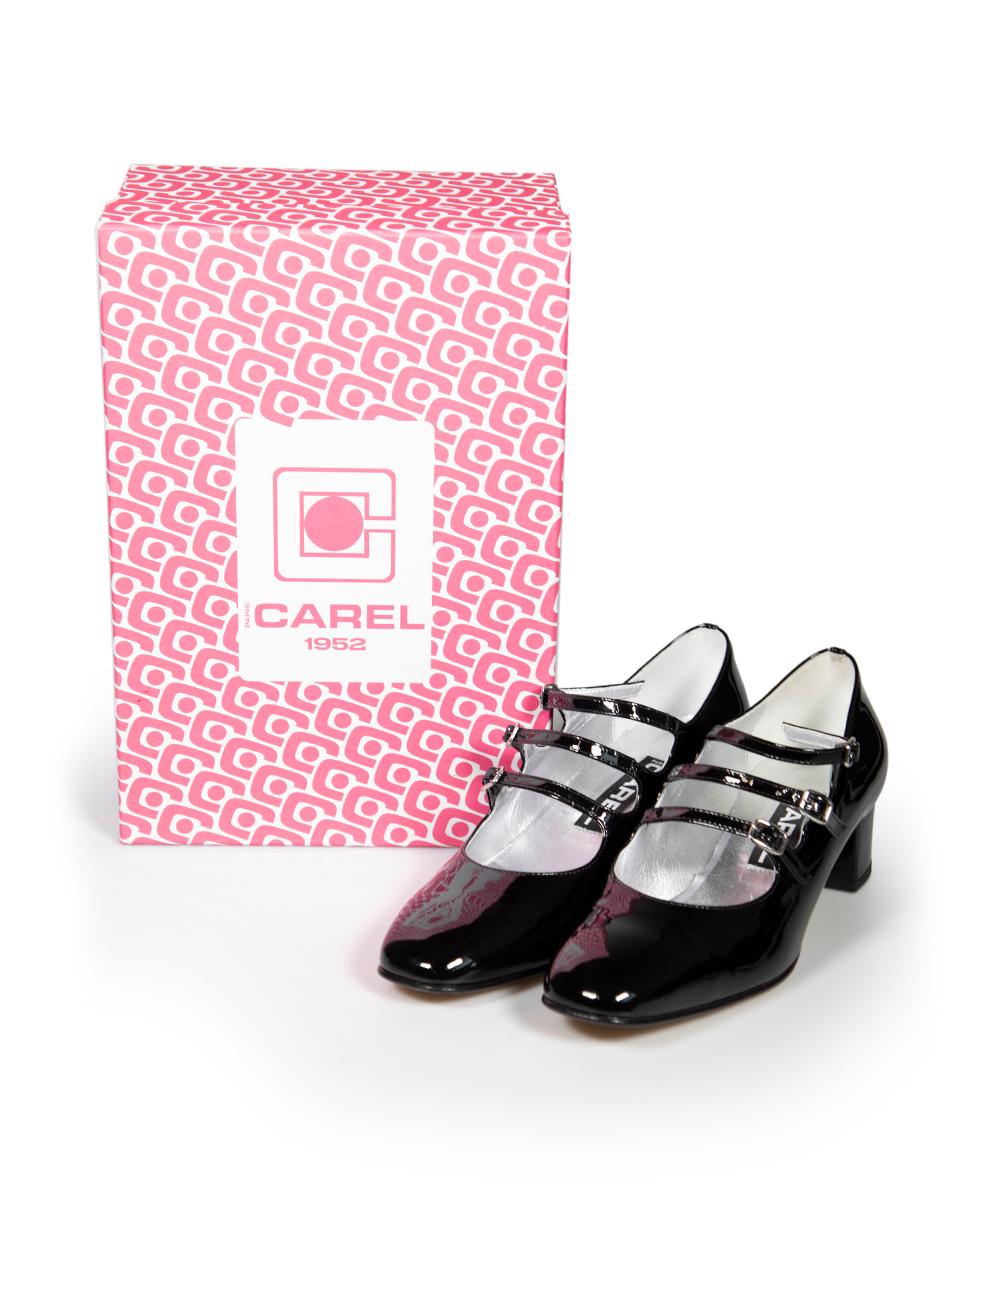 Carel Black Patent Leather Triple Strap Mary Jane Heels Size IT 38.5 For Sale 2